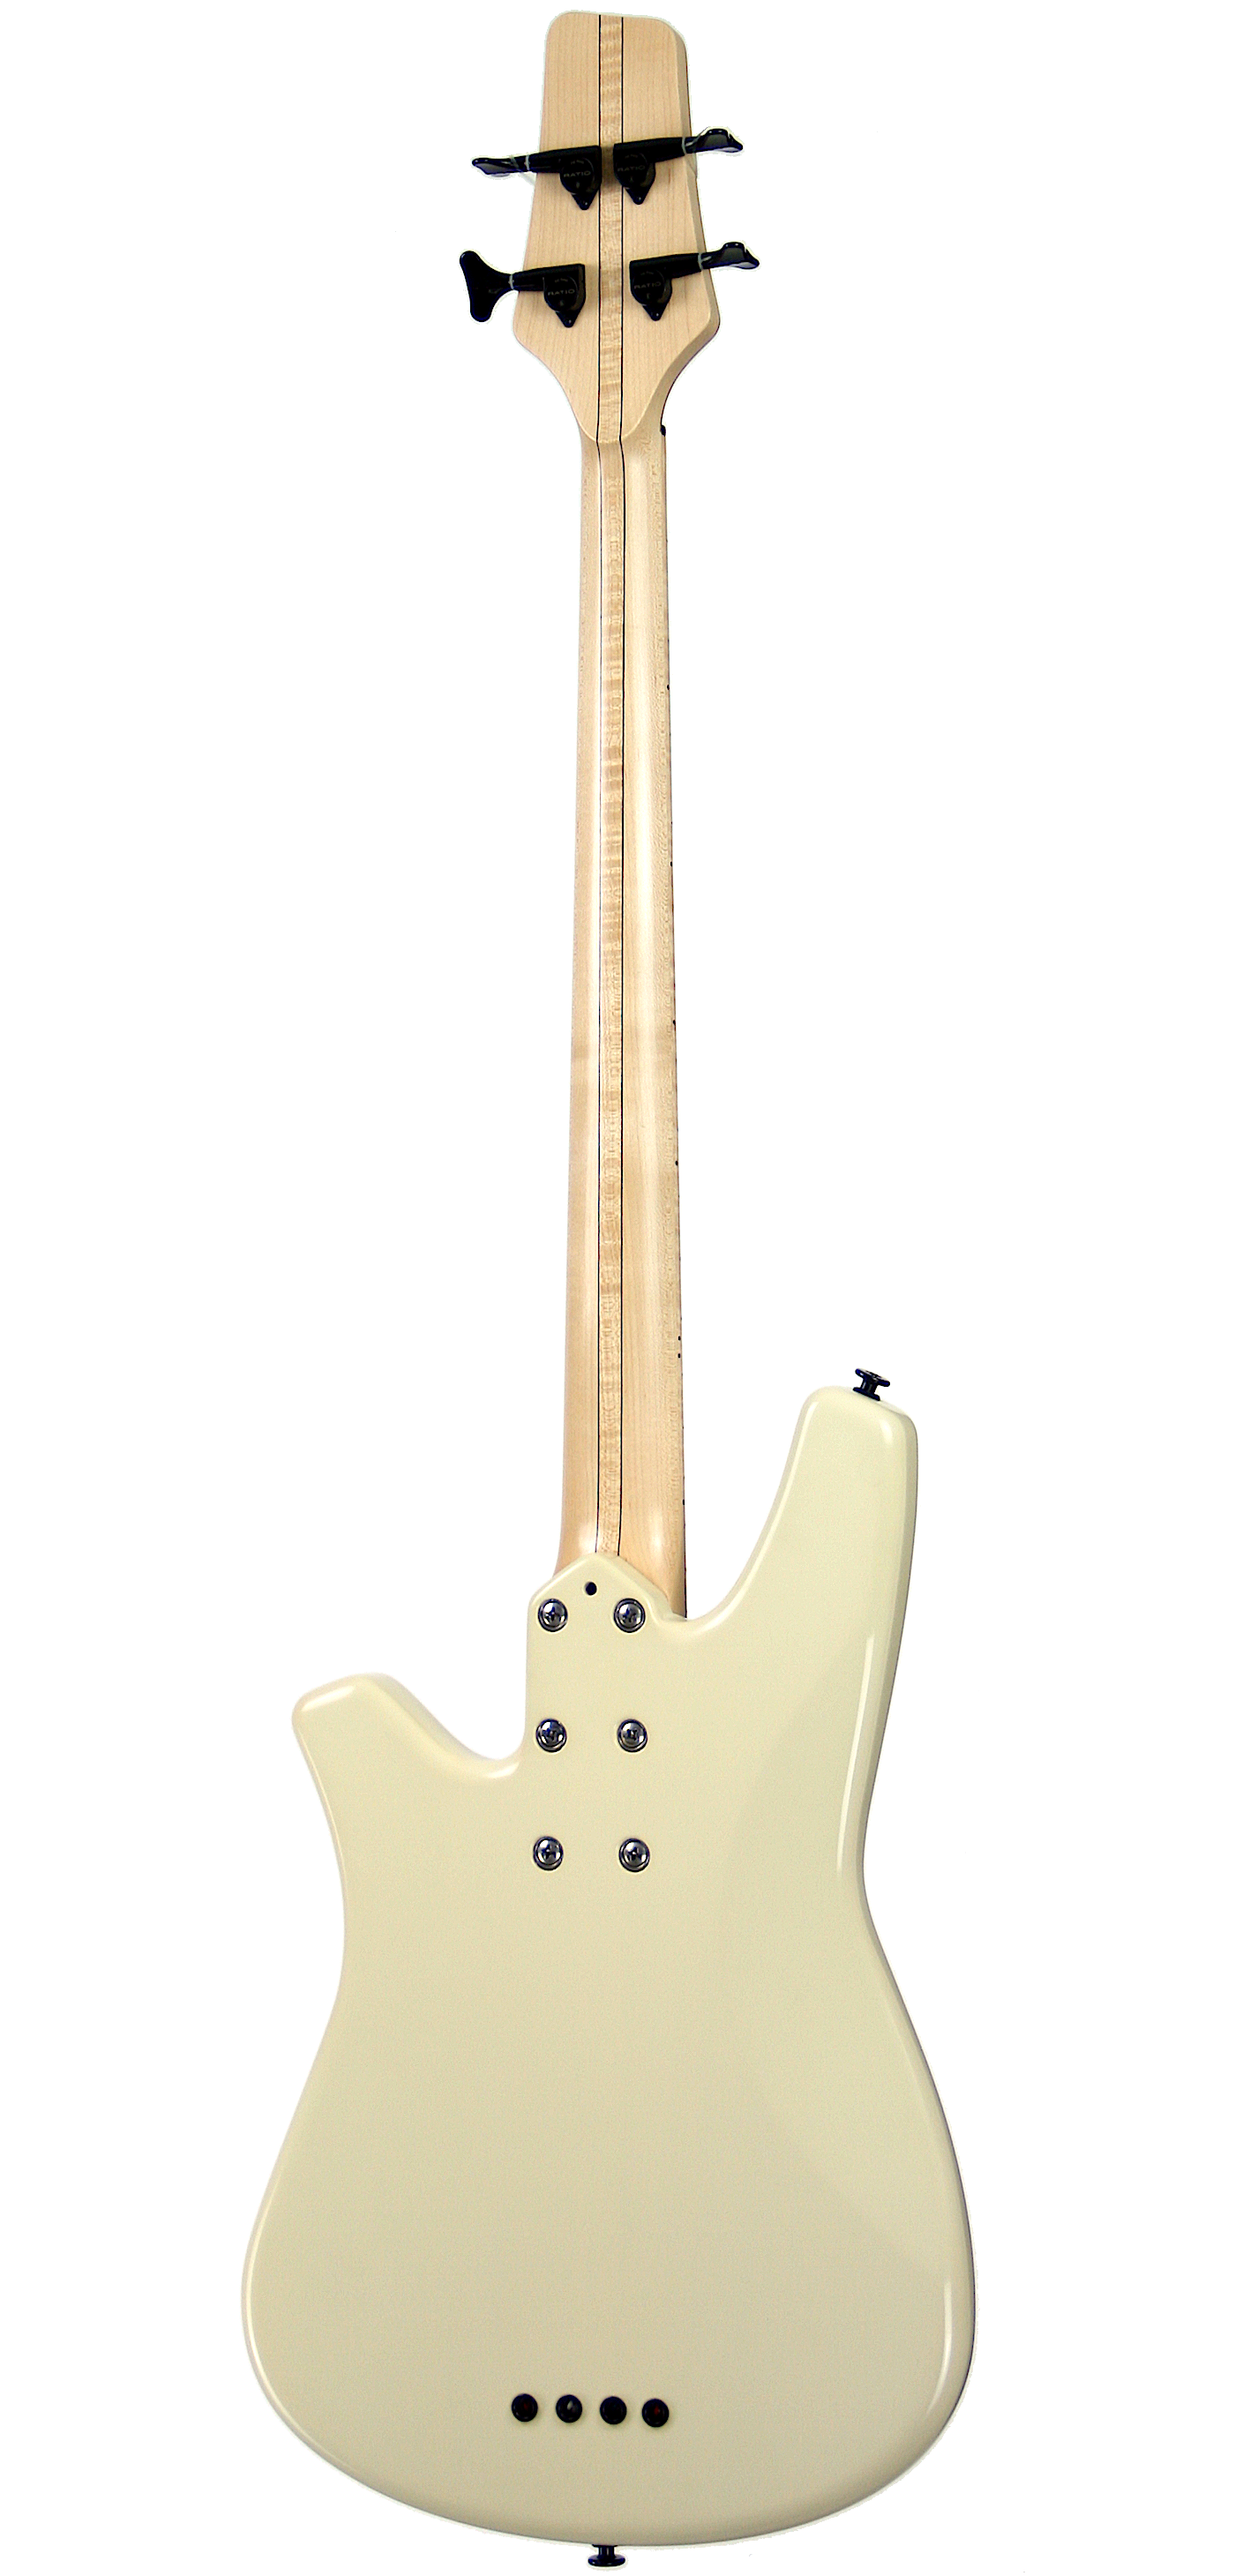 ROLLY™ Bass Guitar. Ash body, maple neck, flame maple fingerboard.